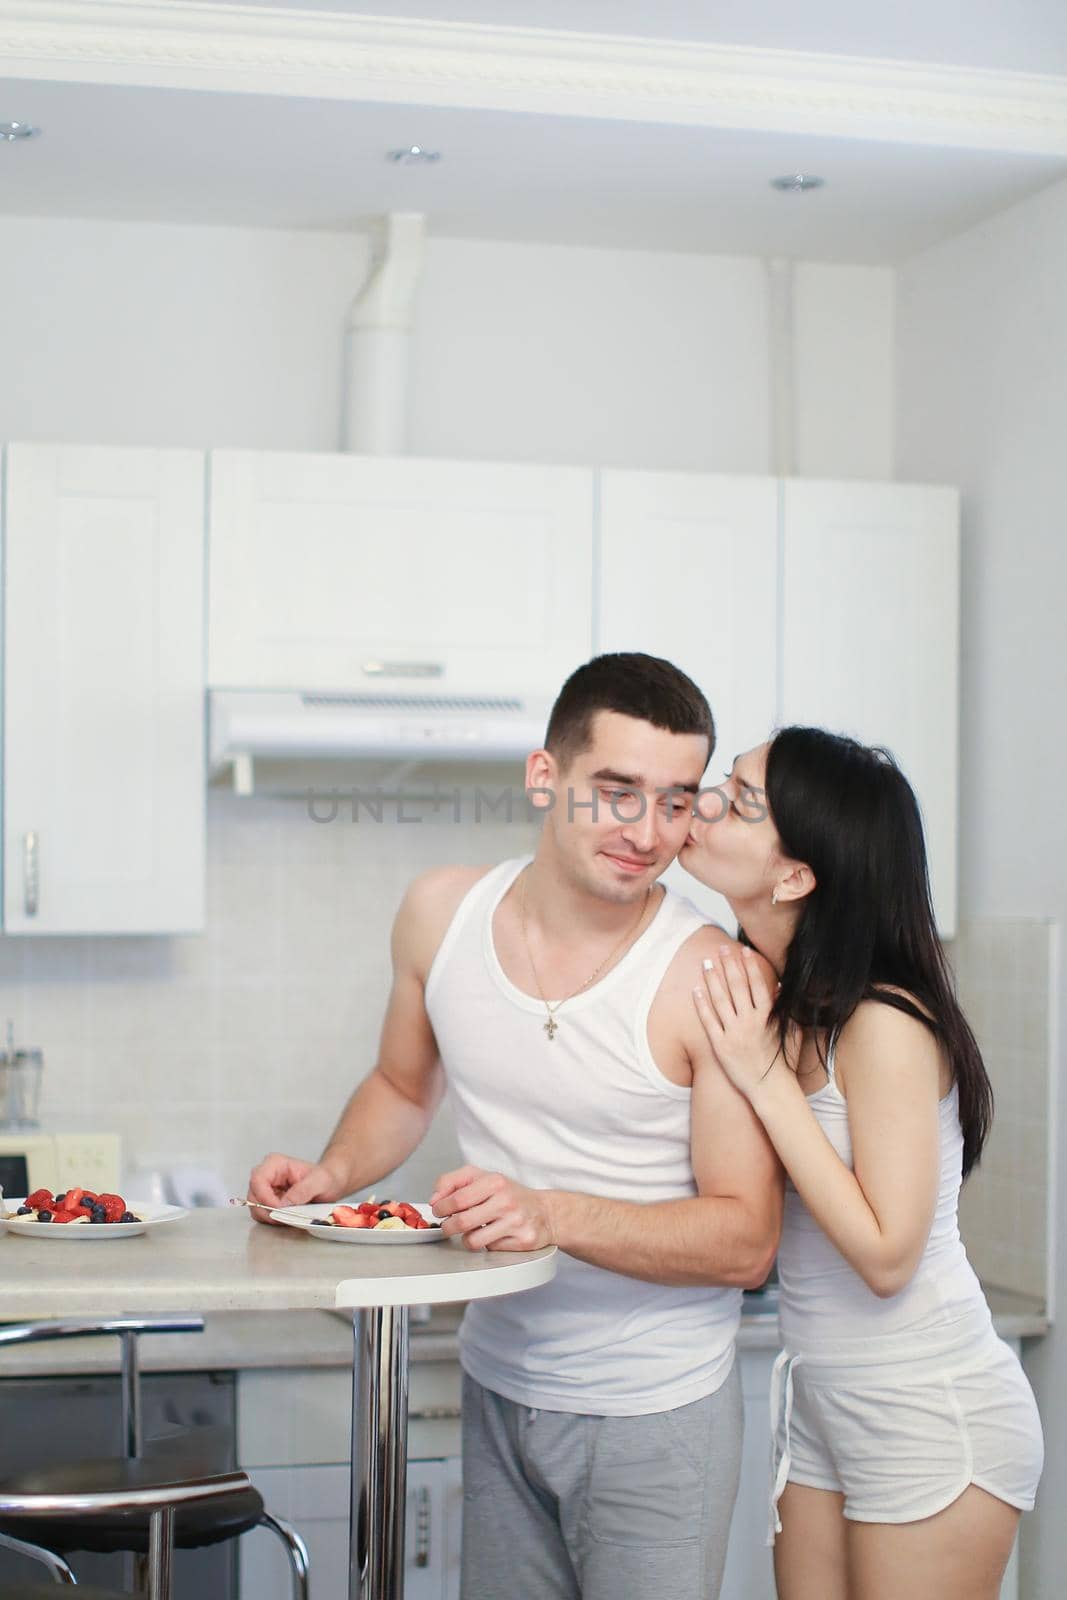 Boy and girl preparing breakfat in morning on kitchen, wearing t shirts. Concept of happy couple and tasty food, cooking and being together.